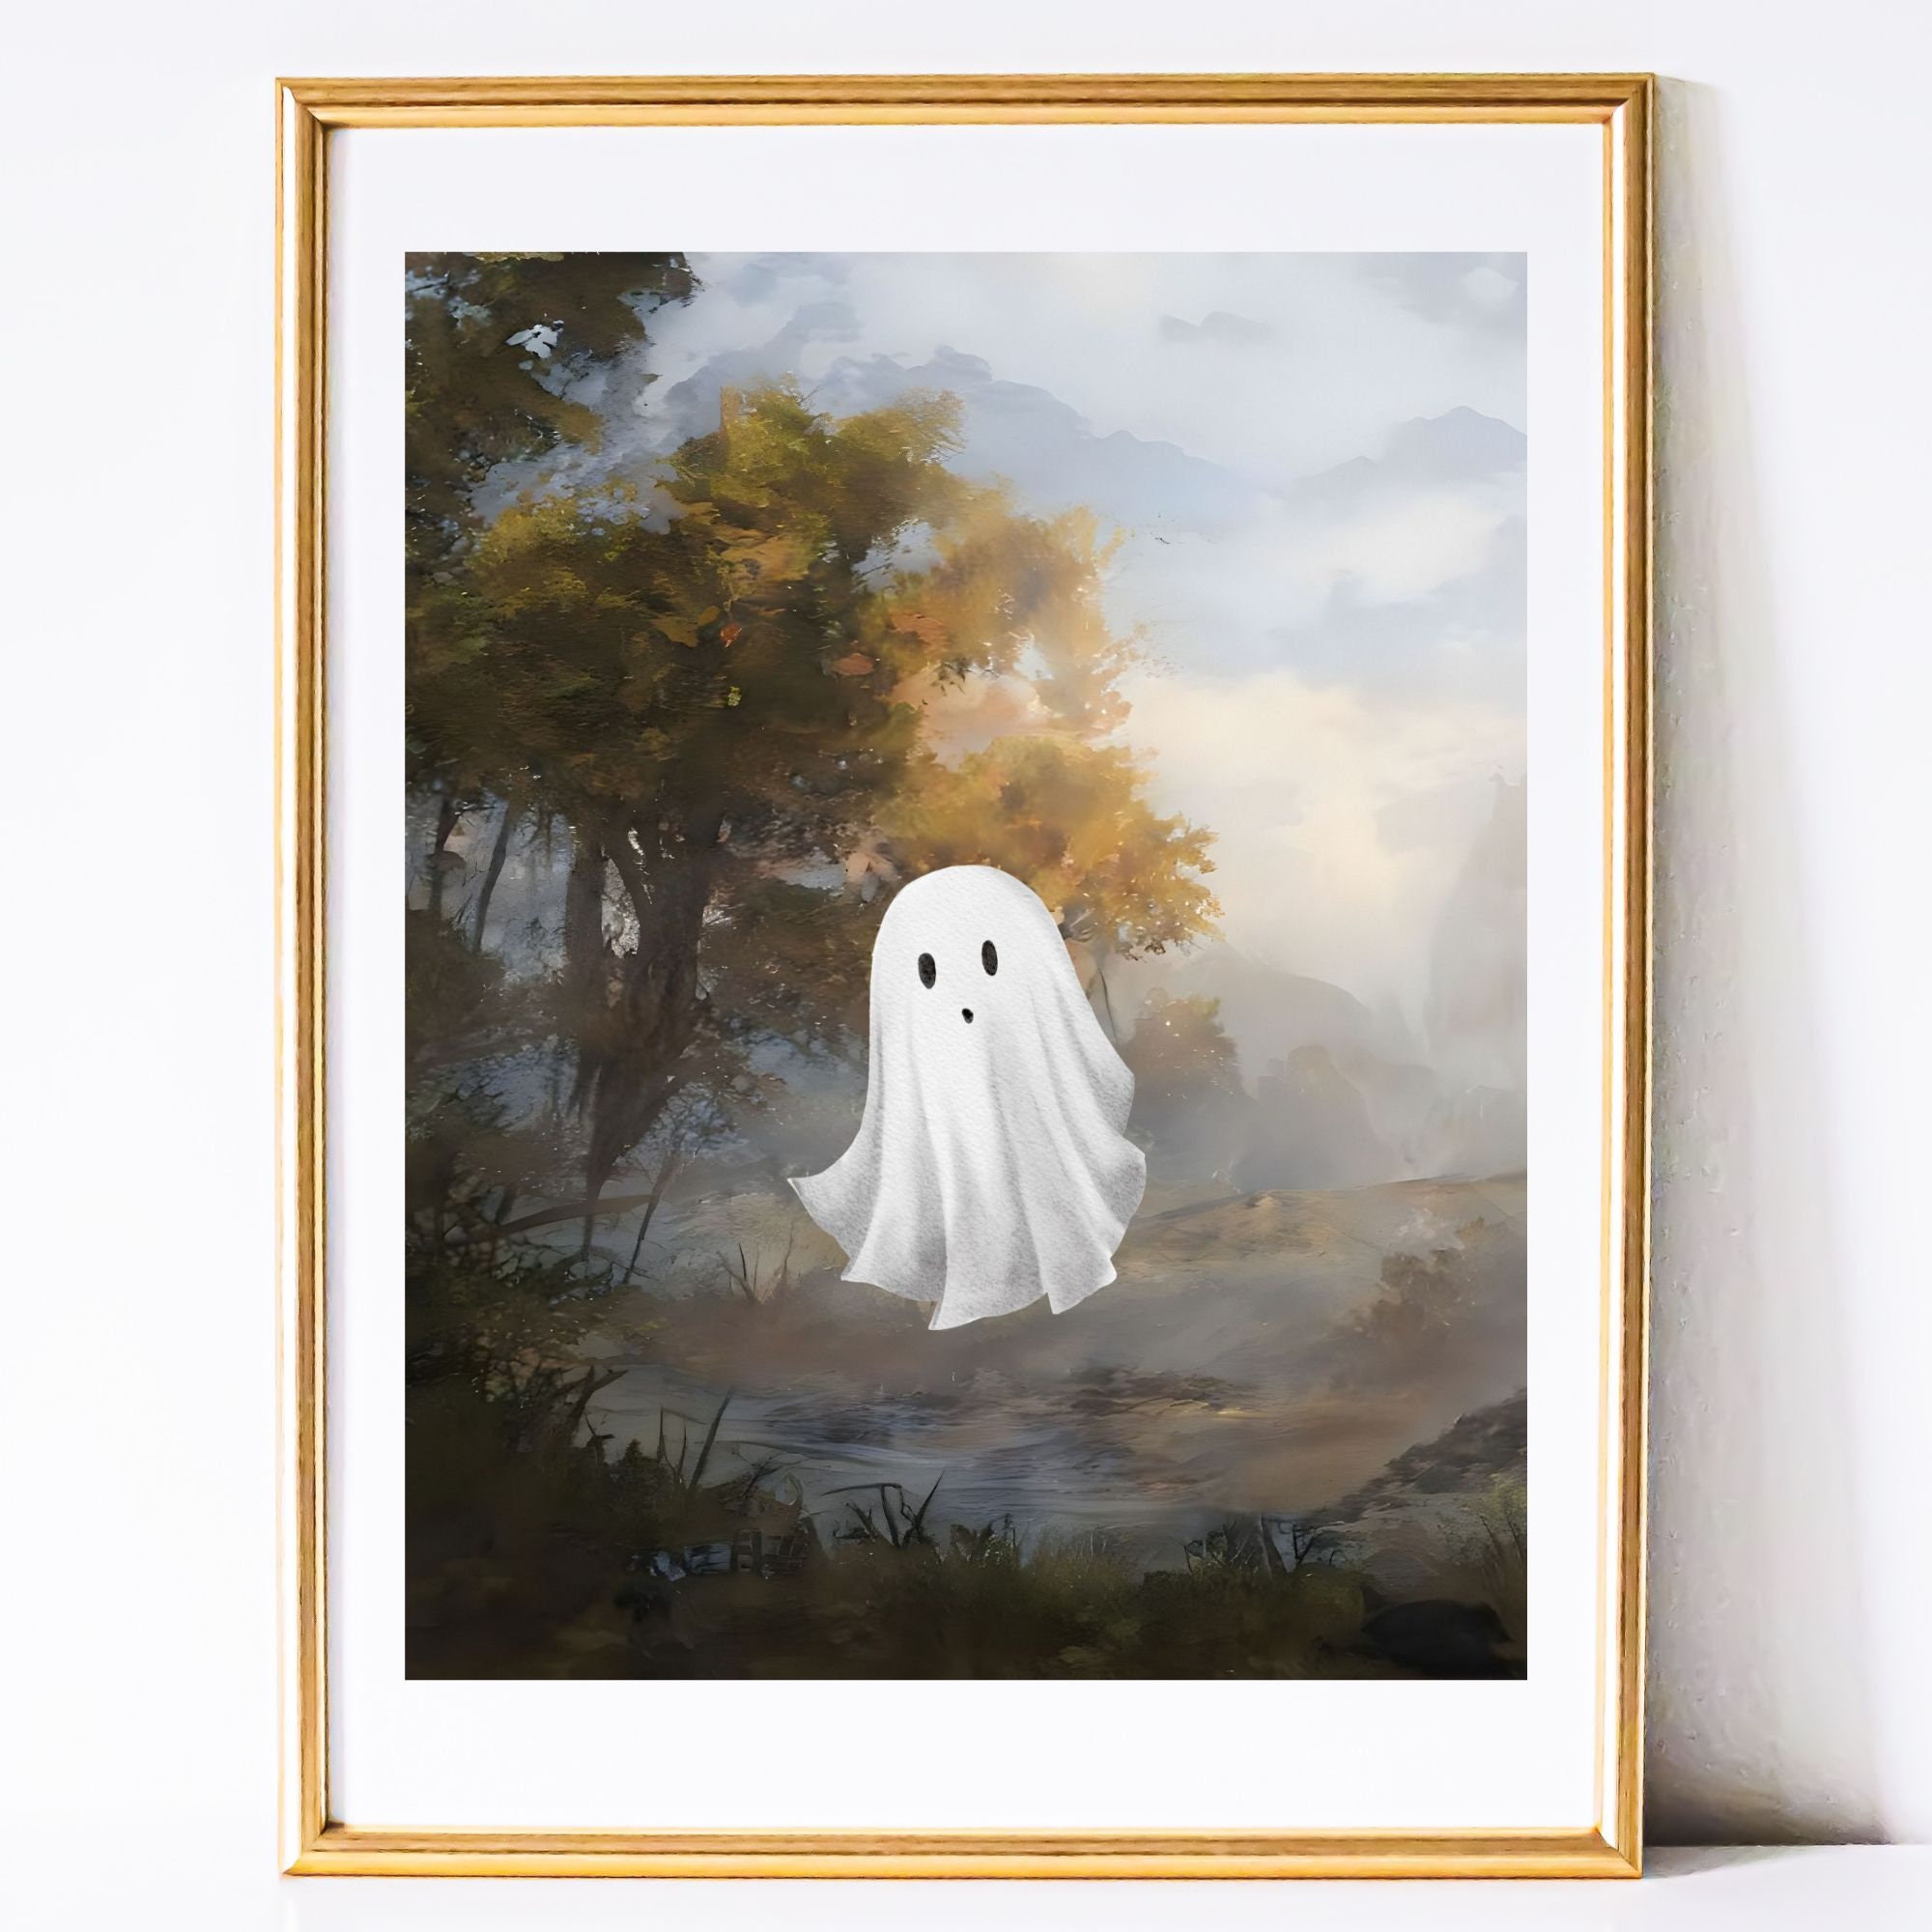 From Old to Spooky Chic: Thrifted Ghost Painting TikTok Trend